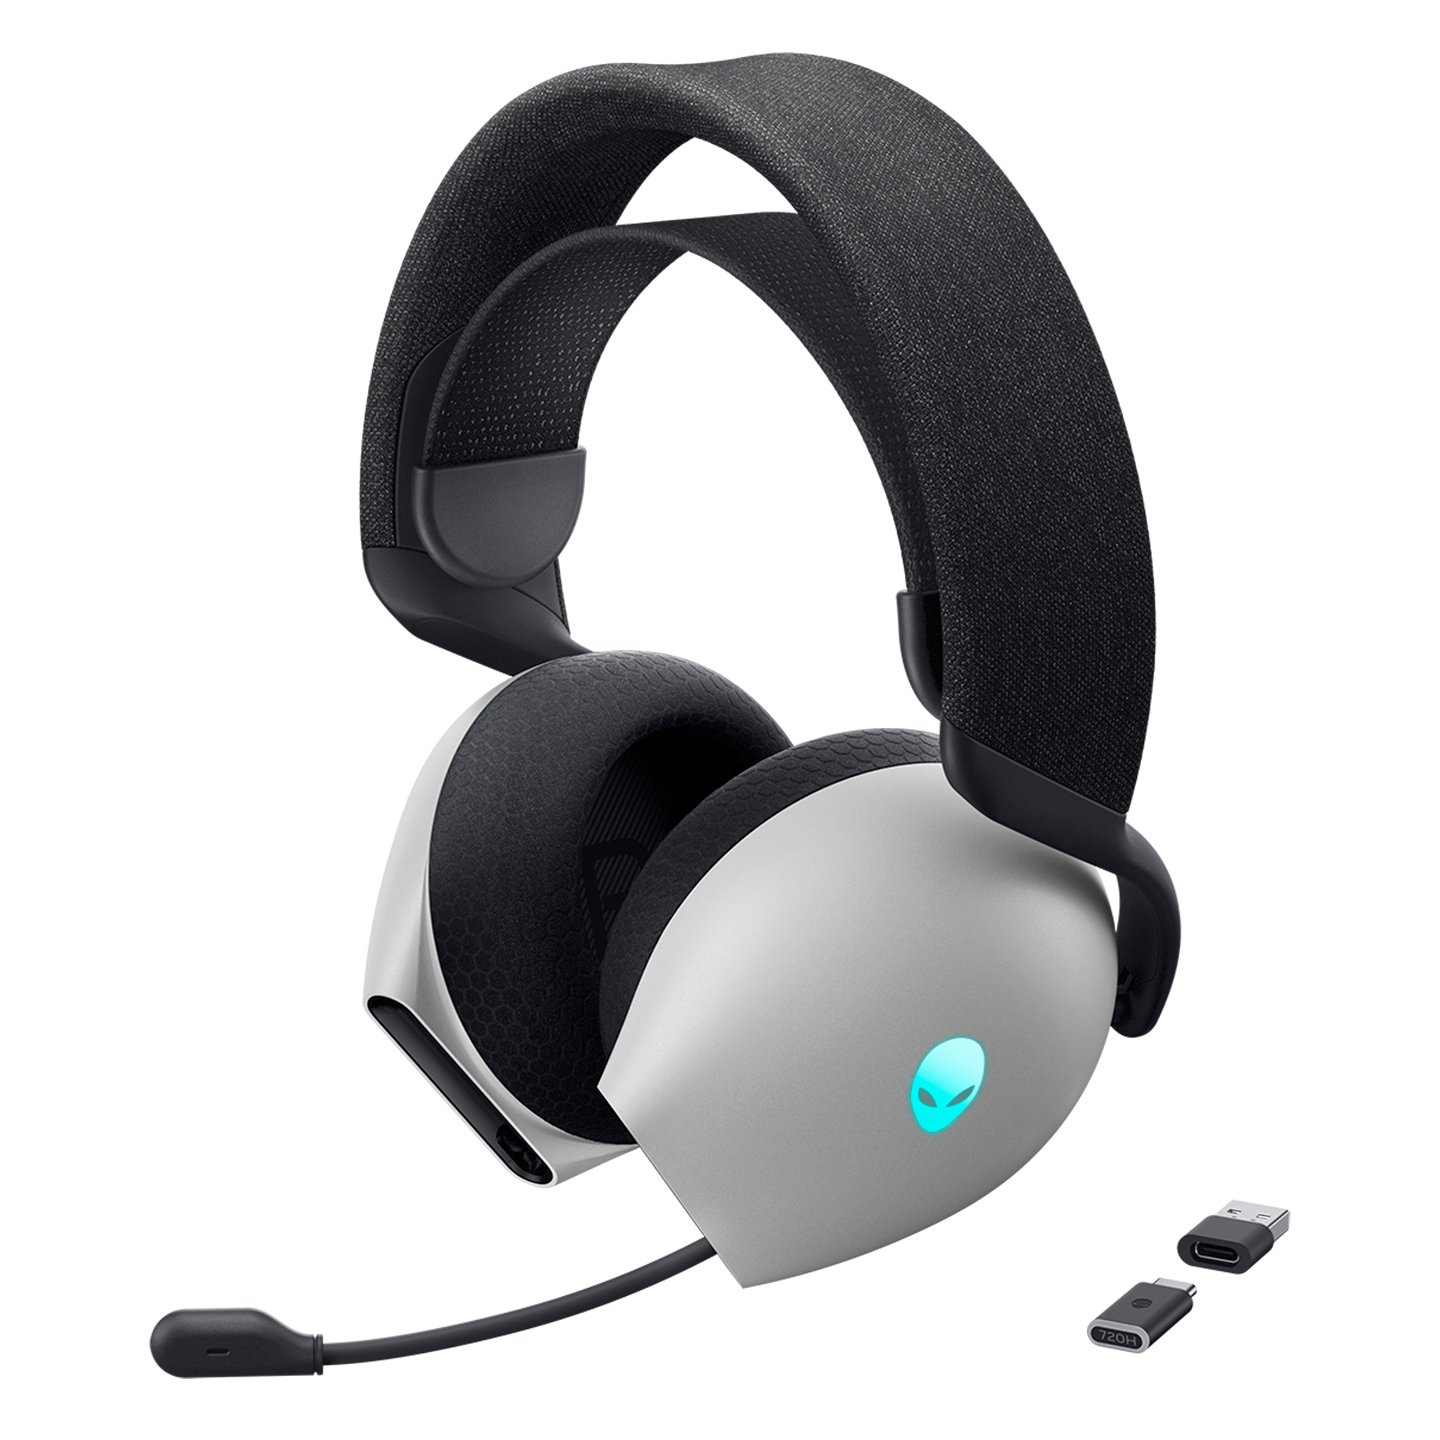 prod-449652-accessories-headphone-alienware-aw720h-1440x1440.png